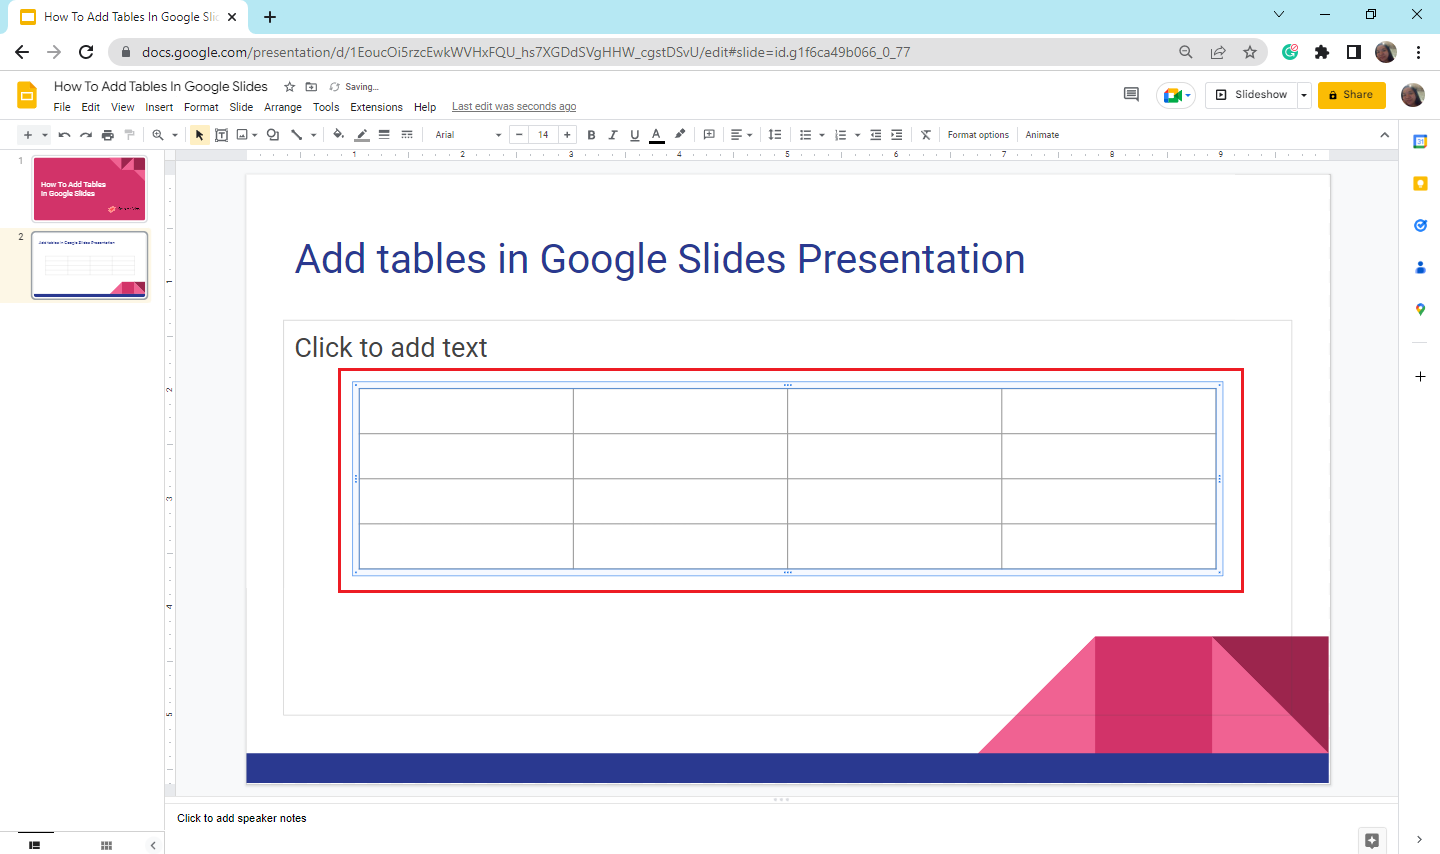 Once, you click it, you already have table in Google Slides